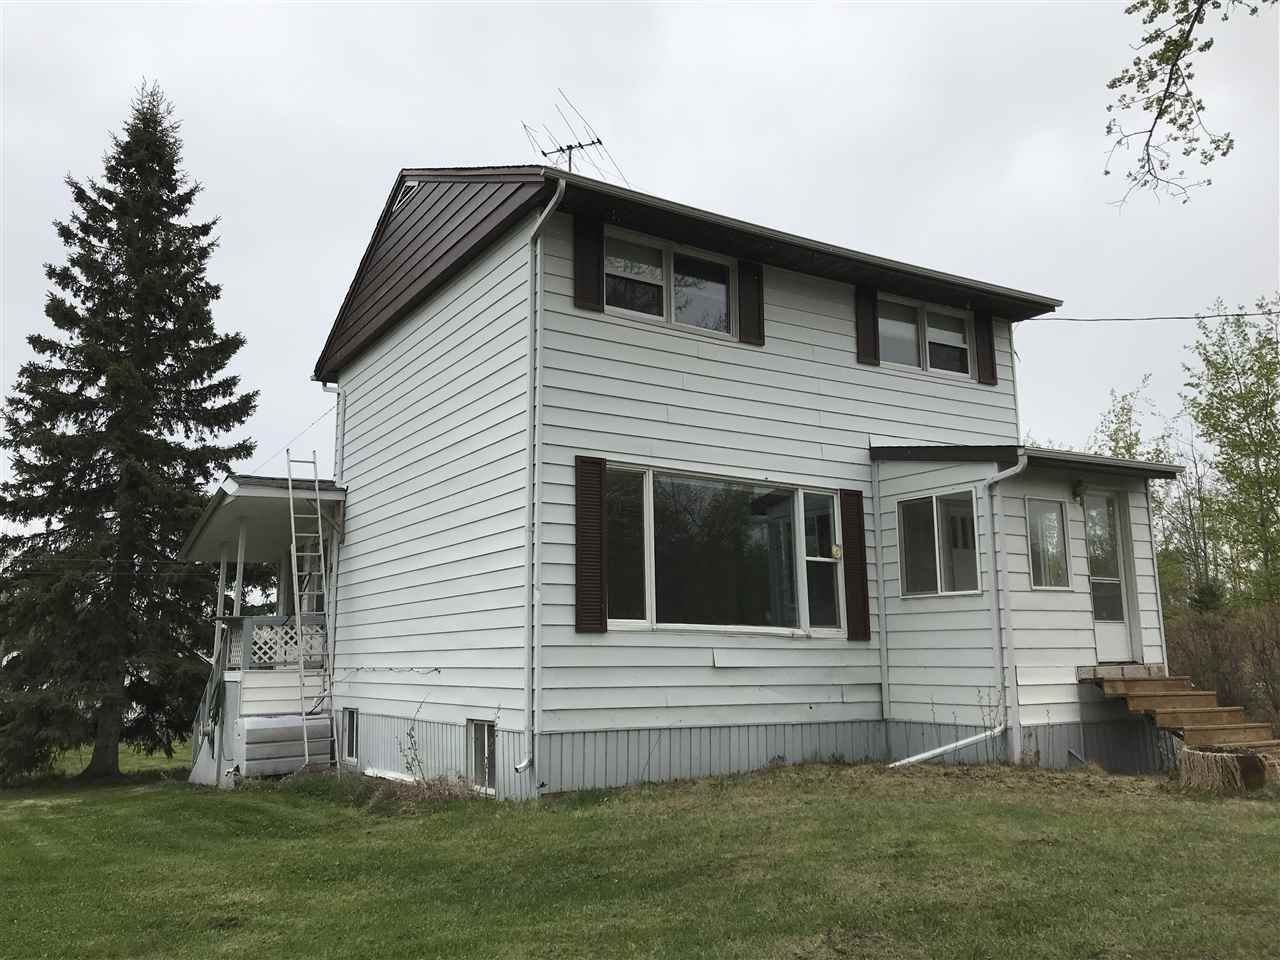 Main Photo: 7511 255 ROAD in : Fort St. John - Rural E 100th House for sale : MLS®# R2373013